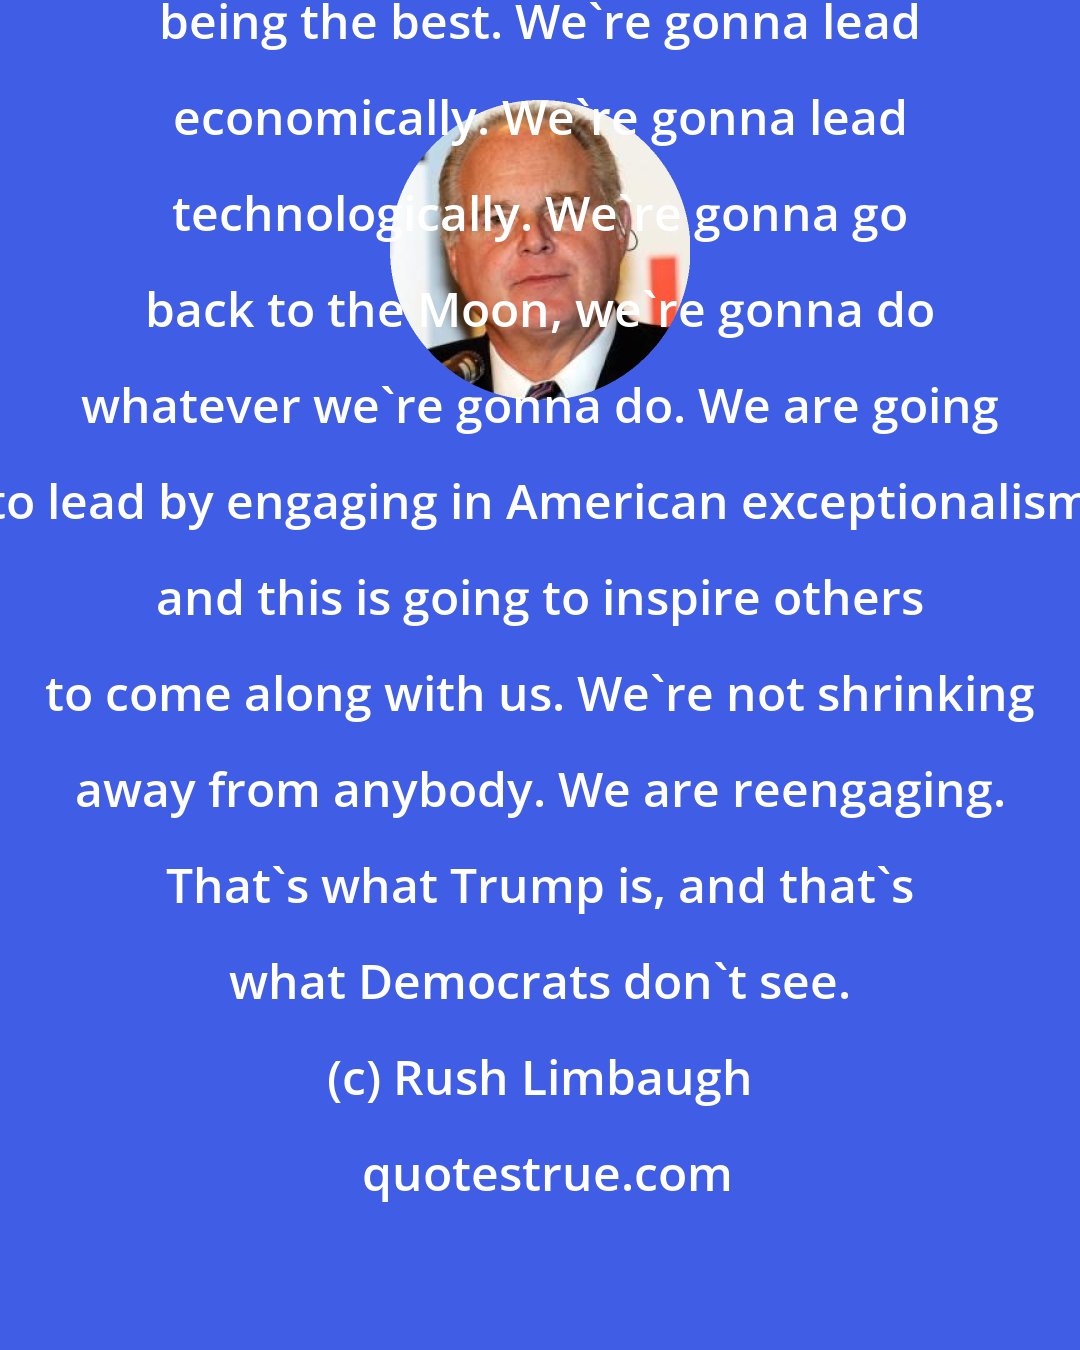 Rush Limbaugh: We are going to lead once again by being the best. We're gonna lead economically. We're gonna lead technologically. We're gonna go back to the Moon, we're gonna do whatever we're gonna do. We are going to lead by engaging in American exceptionalism and this is going to inspire others to come along with us. We're not shrinking away from anybody. We are reengaging. That's what Trump is, and that's what Democrats don't see.